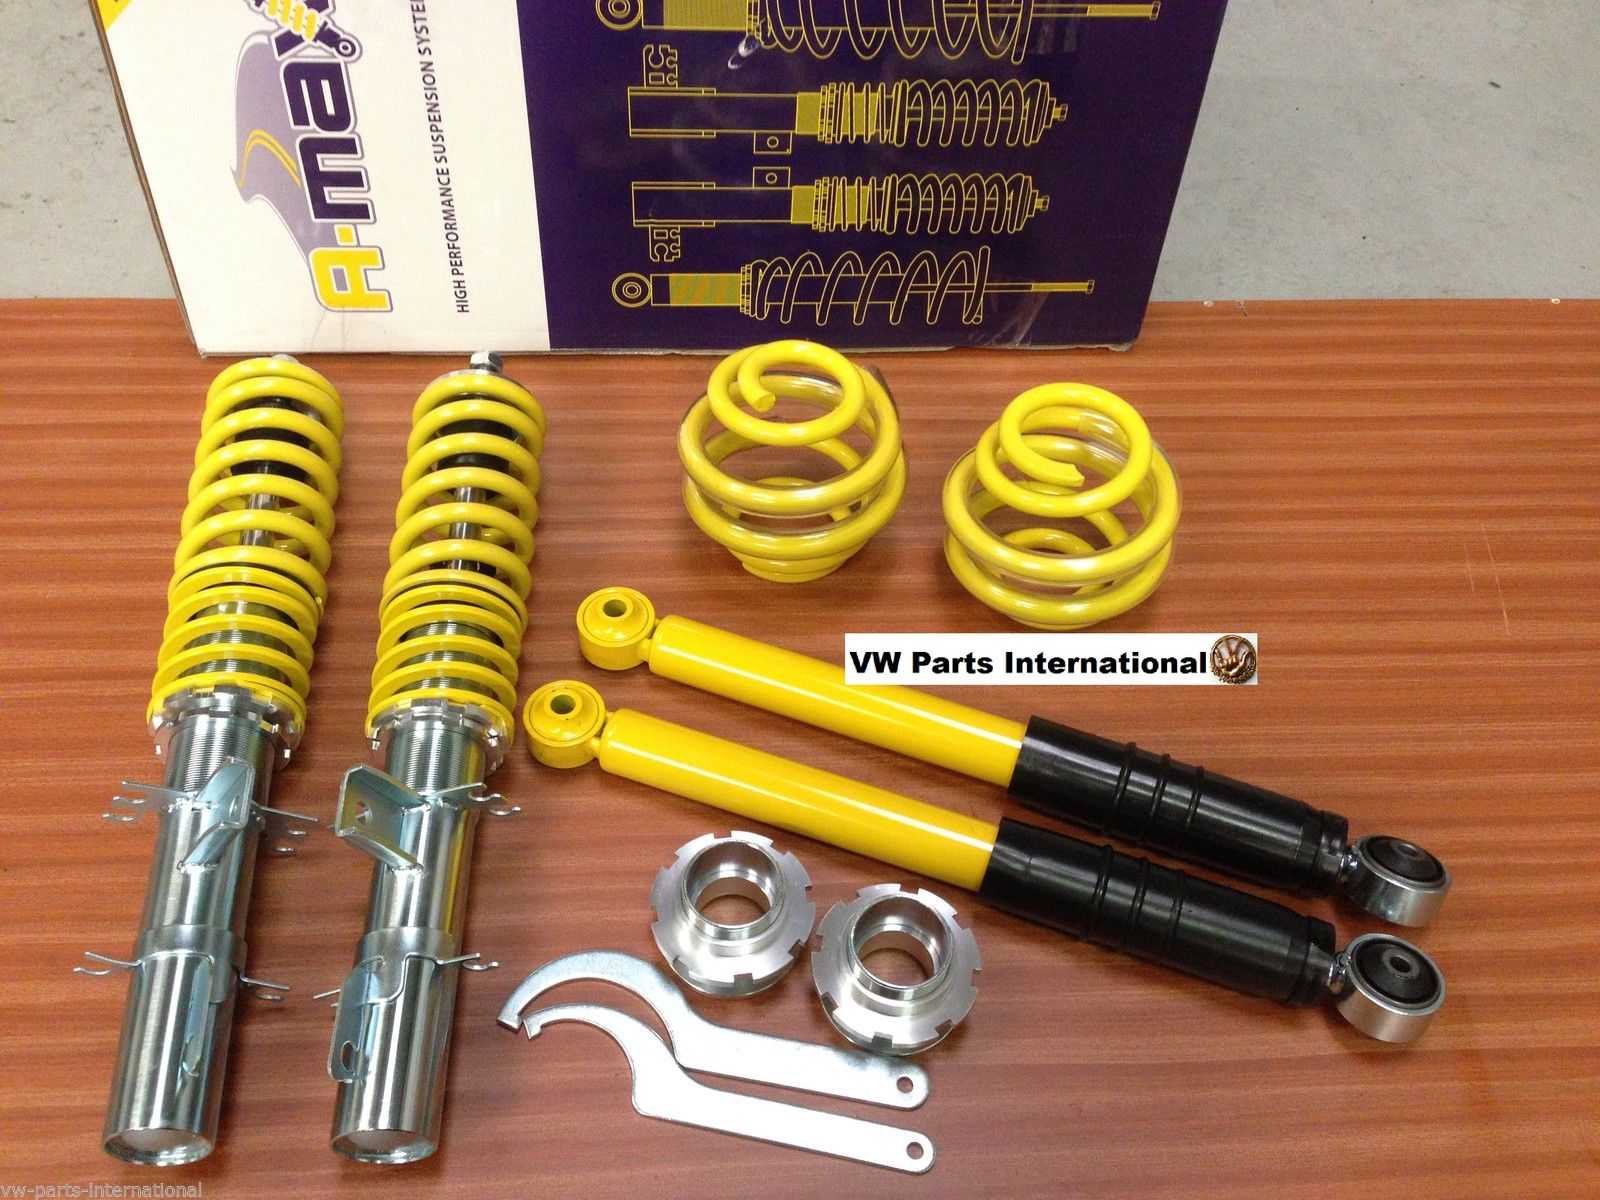 VW GOLF MK4 R32 GTI 4MOTION COILOVERS AMAX WORLDWIDE SHIPPING 161435406846